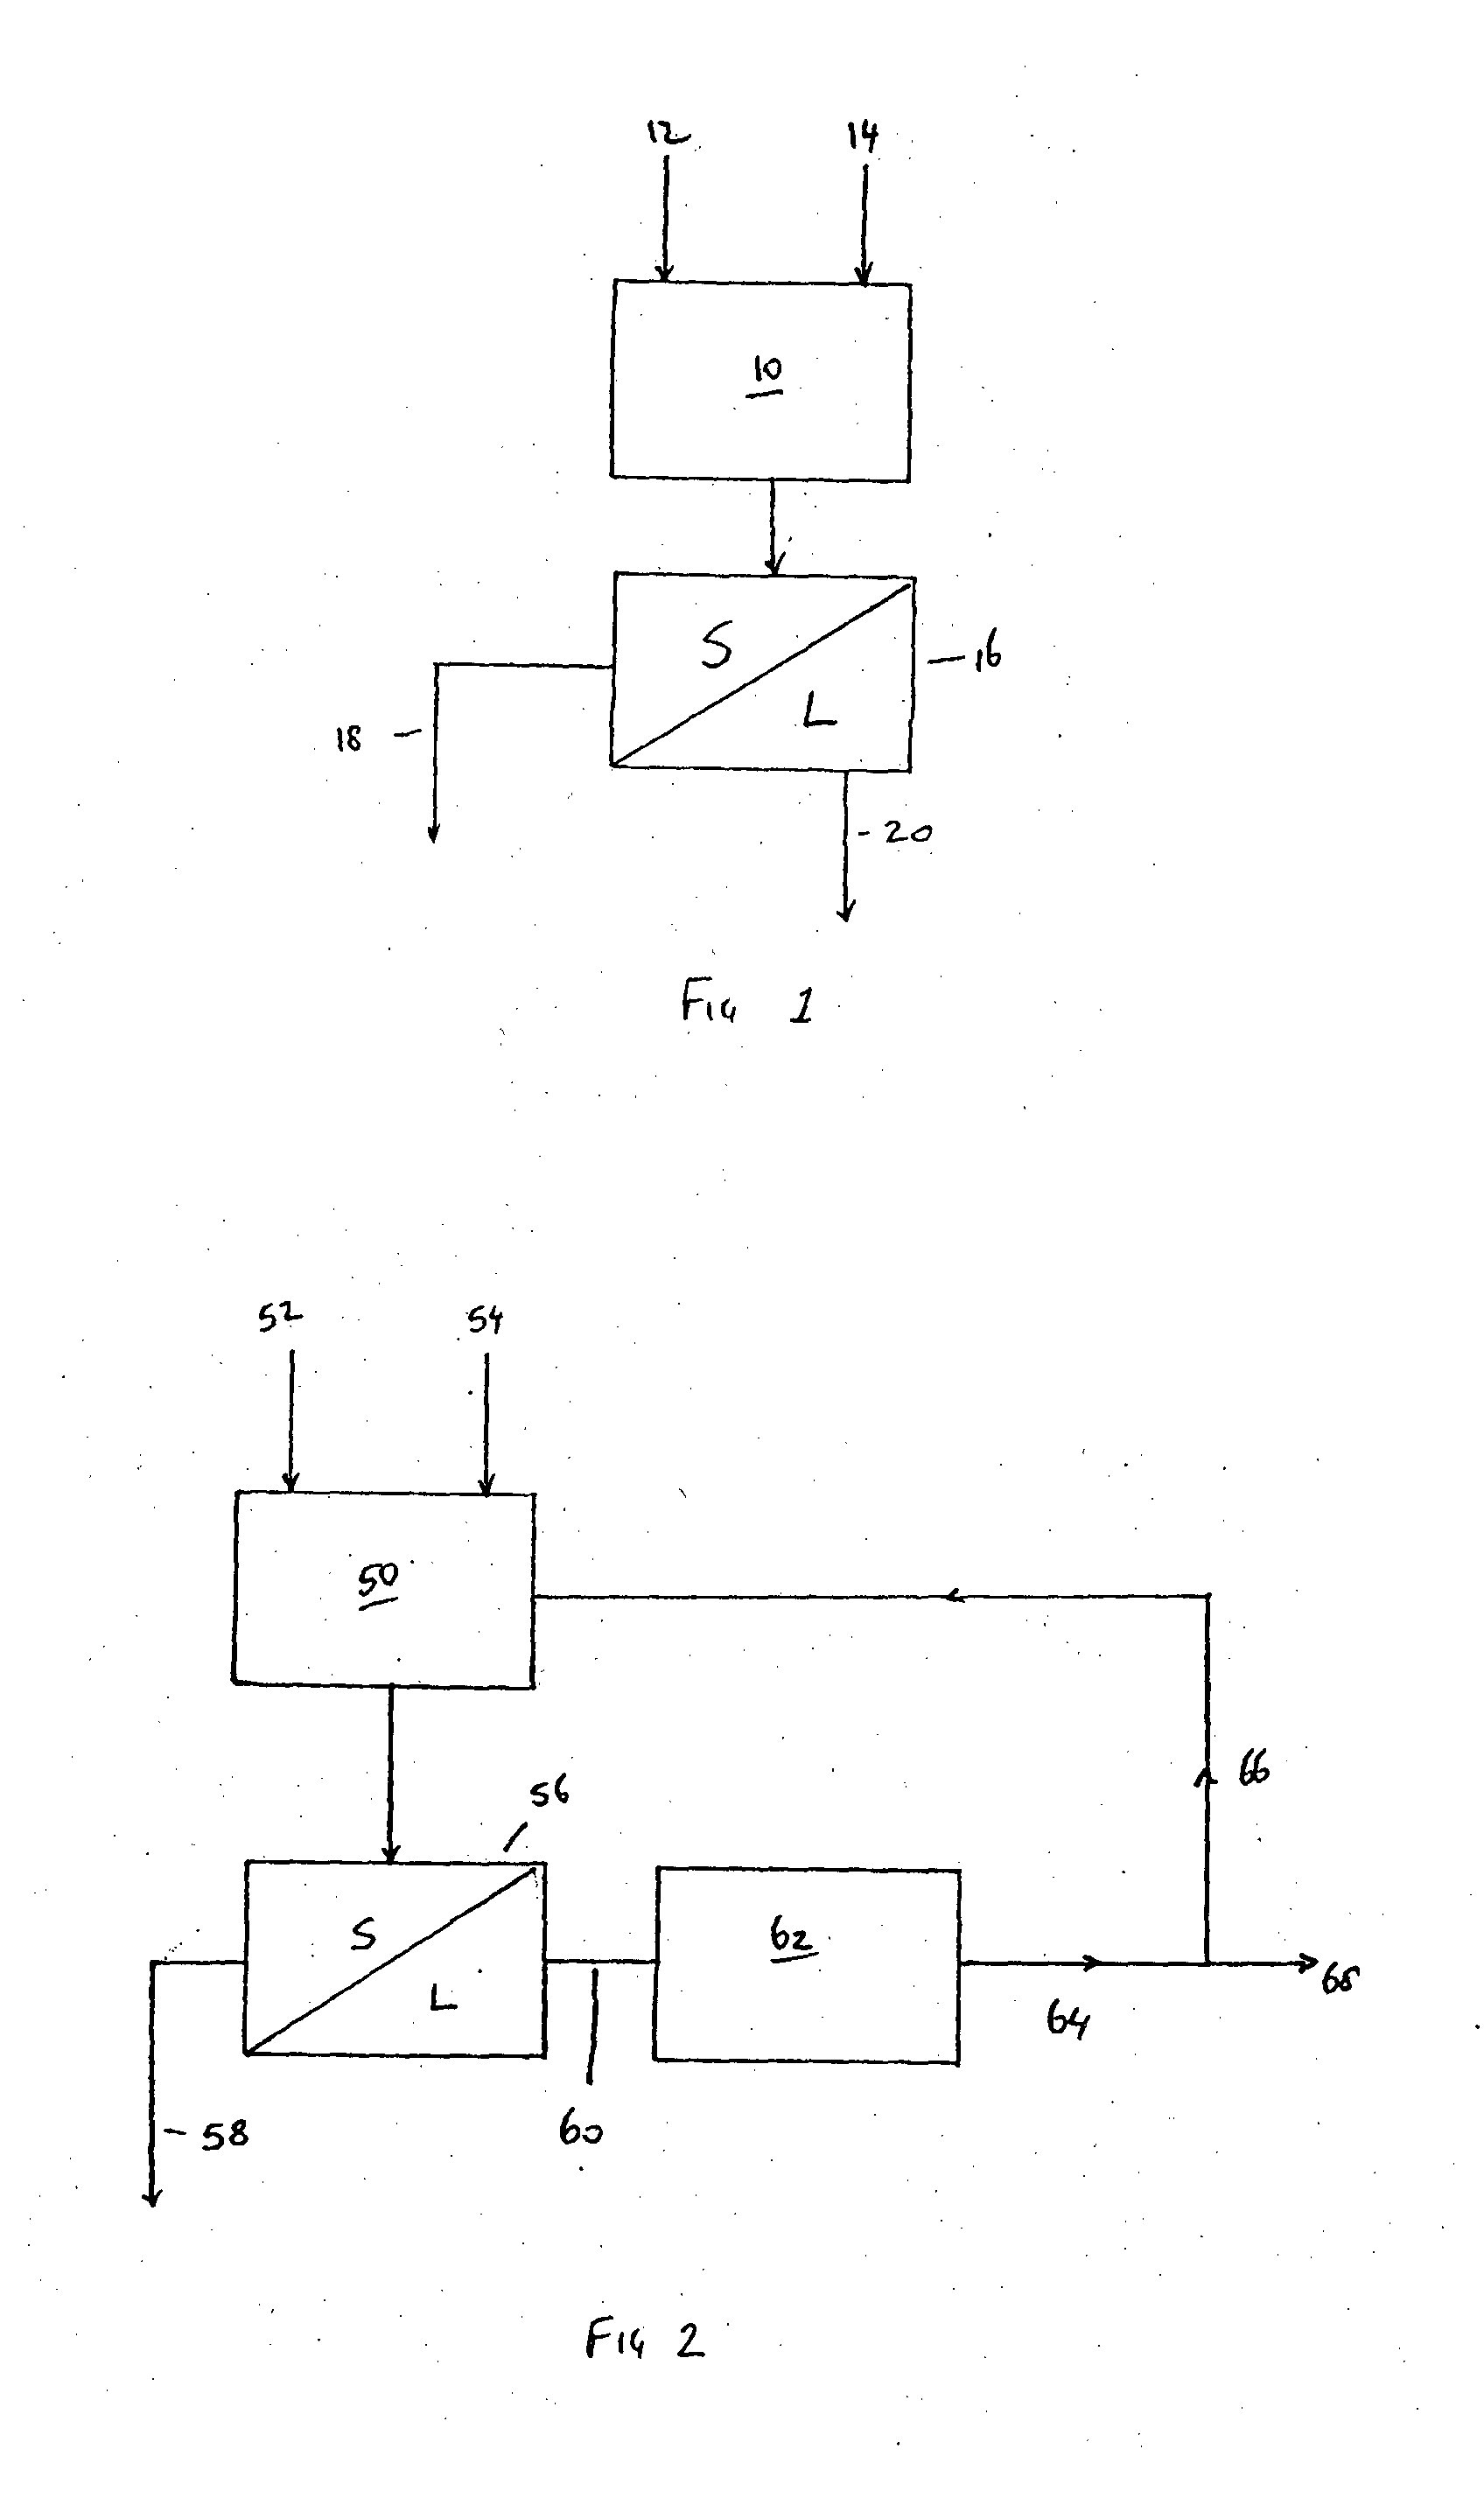 Method for treating arsenic containing materials